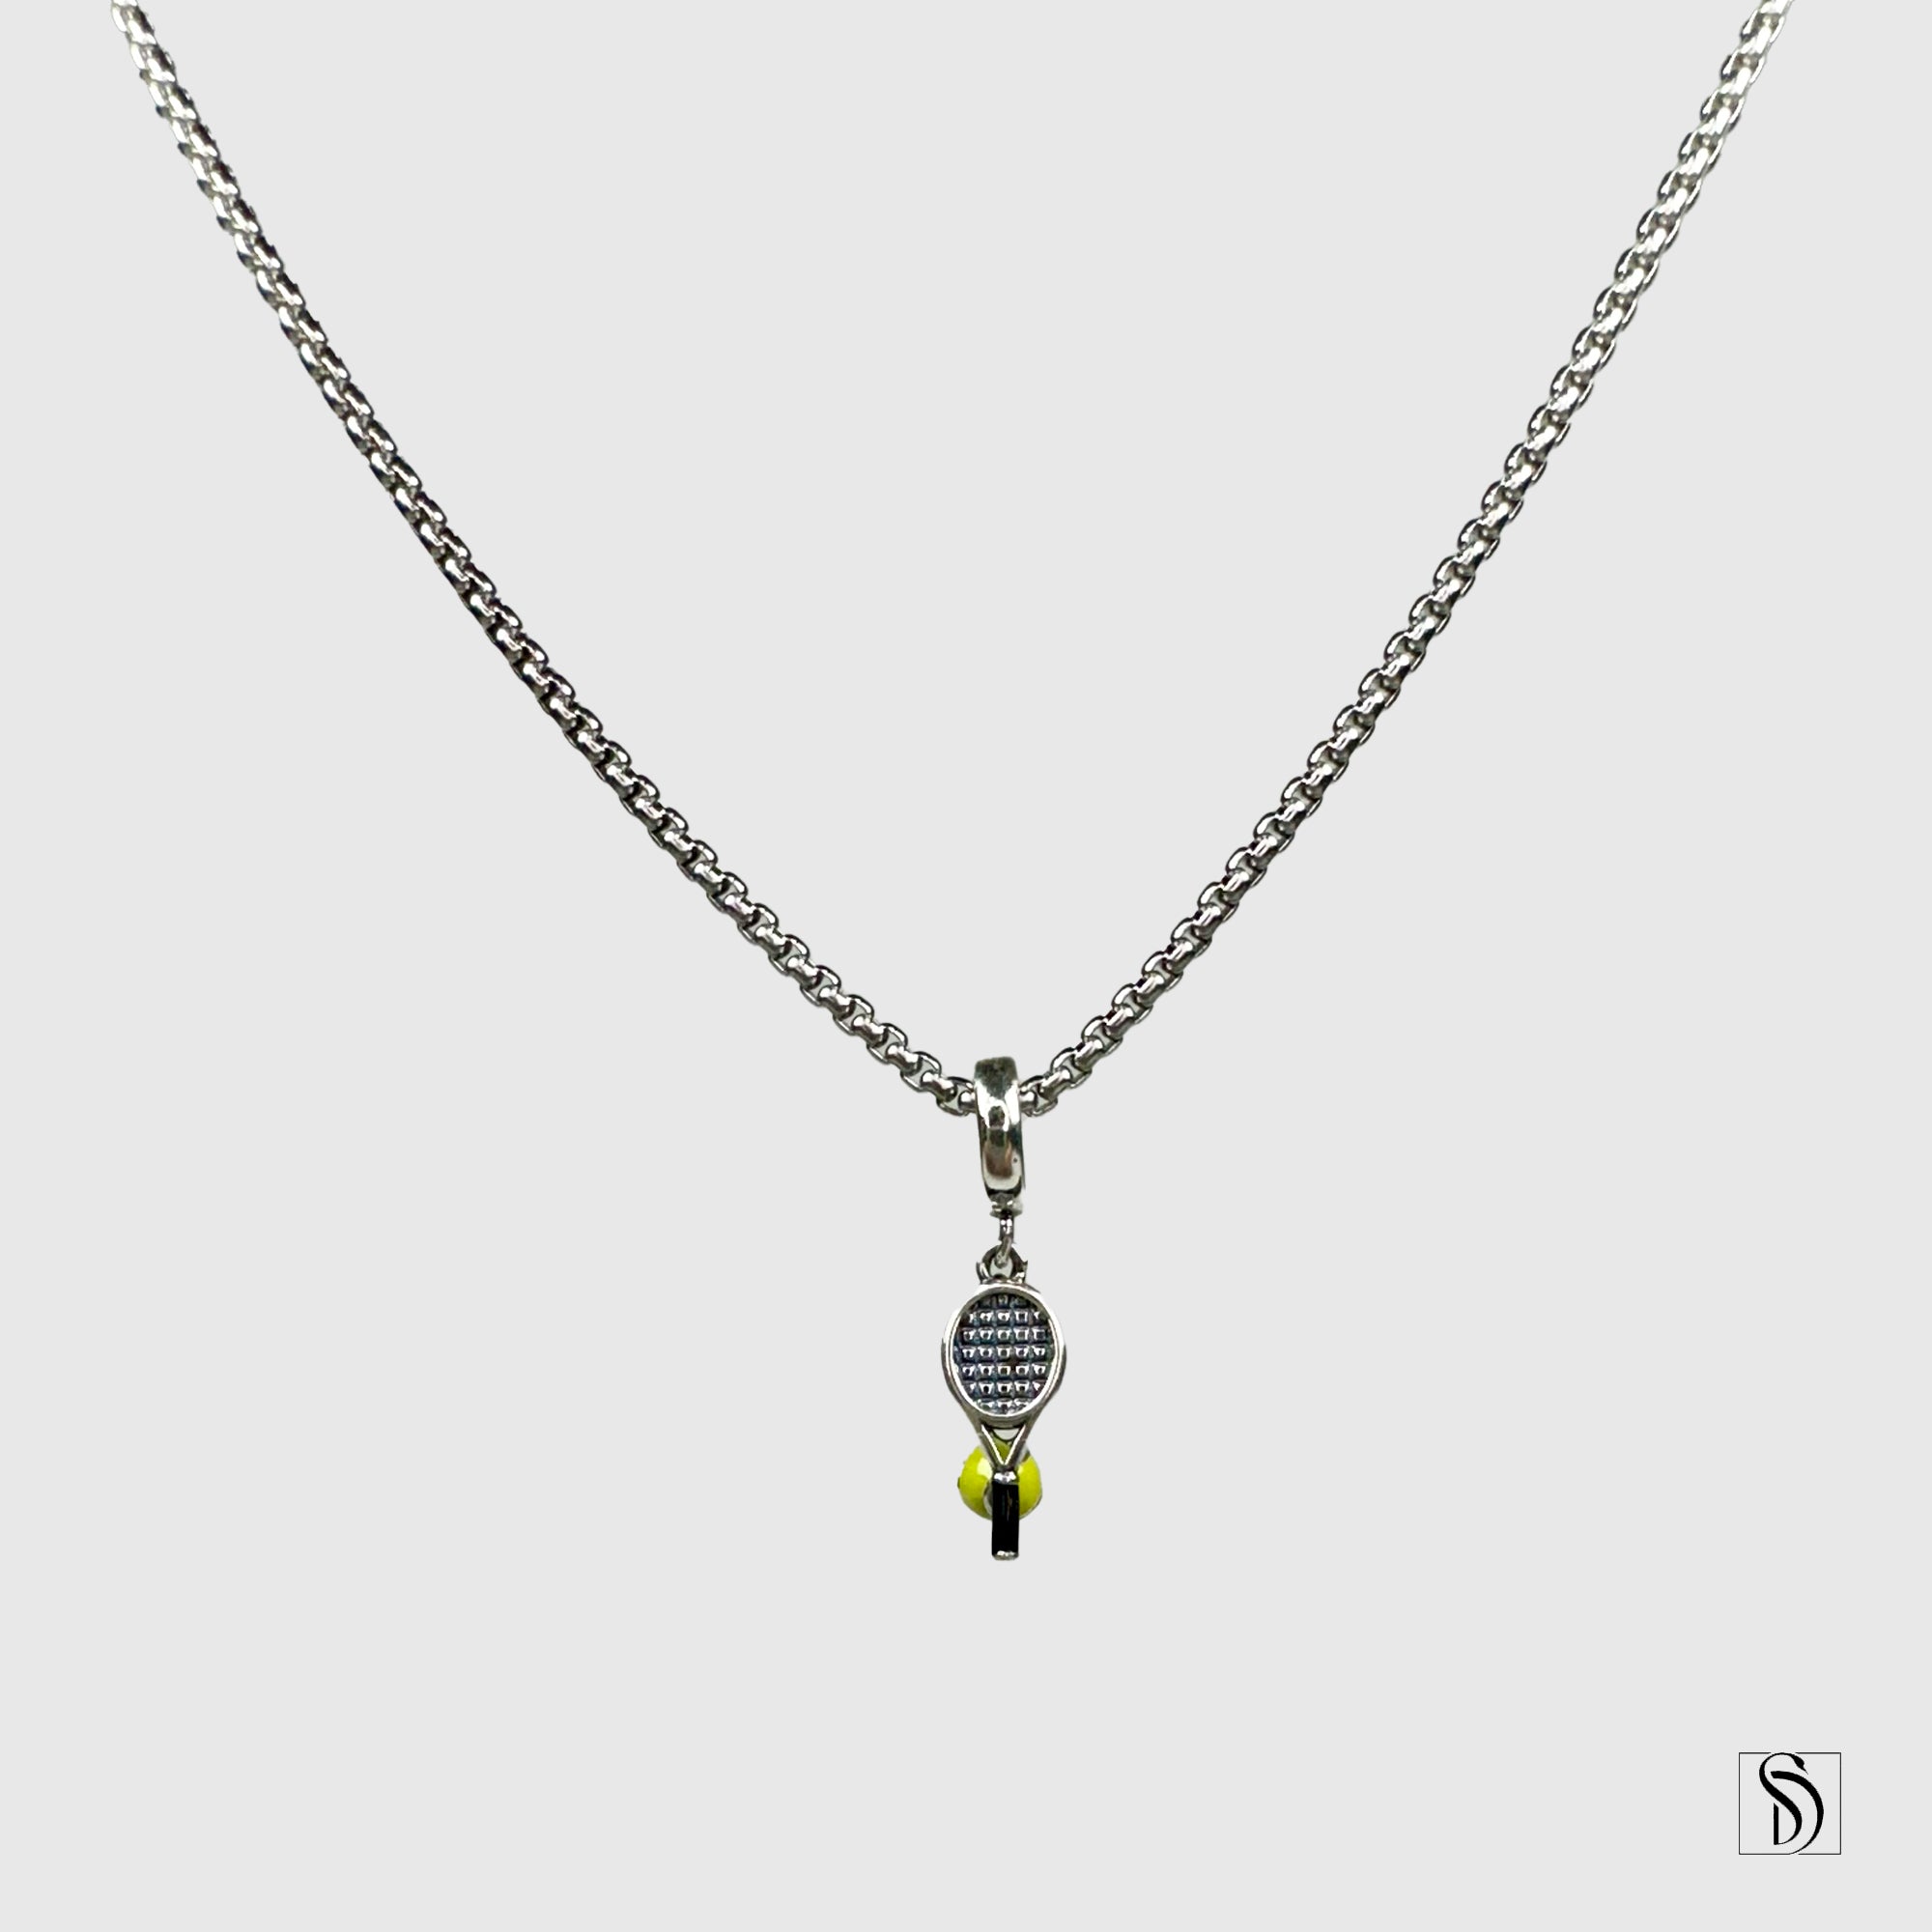 Tennis necklace with 10K yellow gold tennis ball pendant and chain -  Shopping.tennis